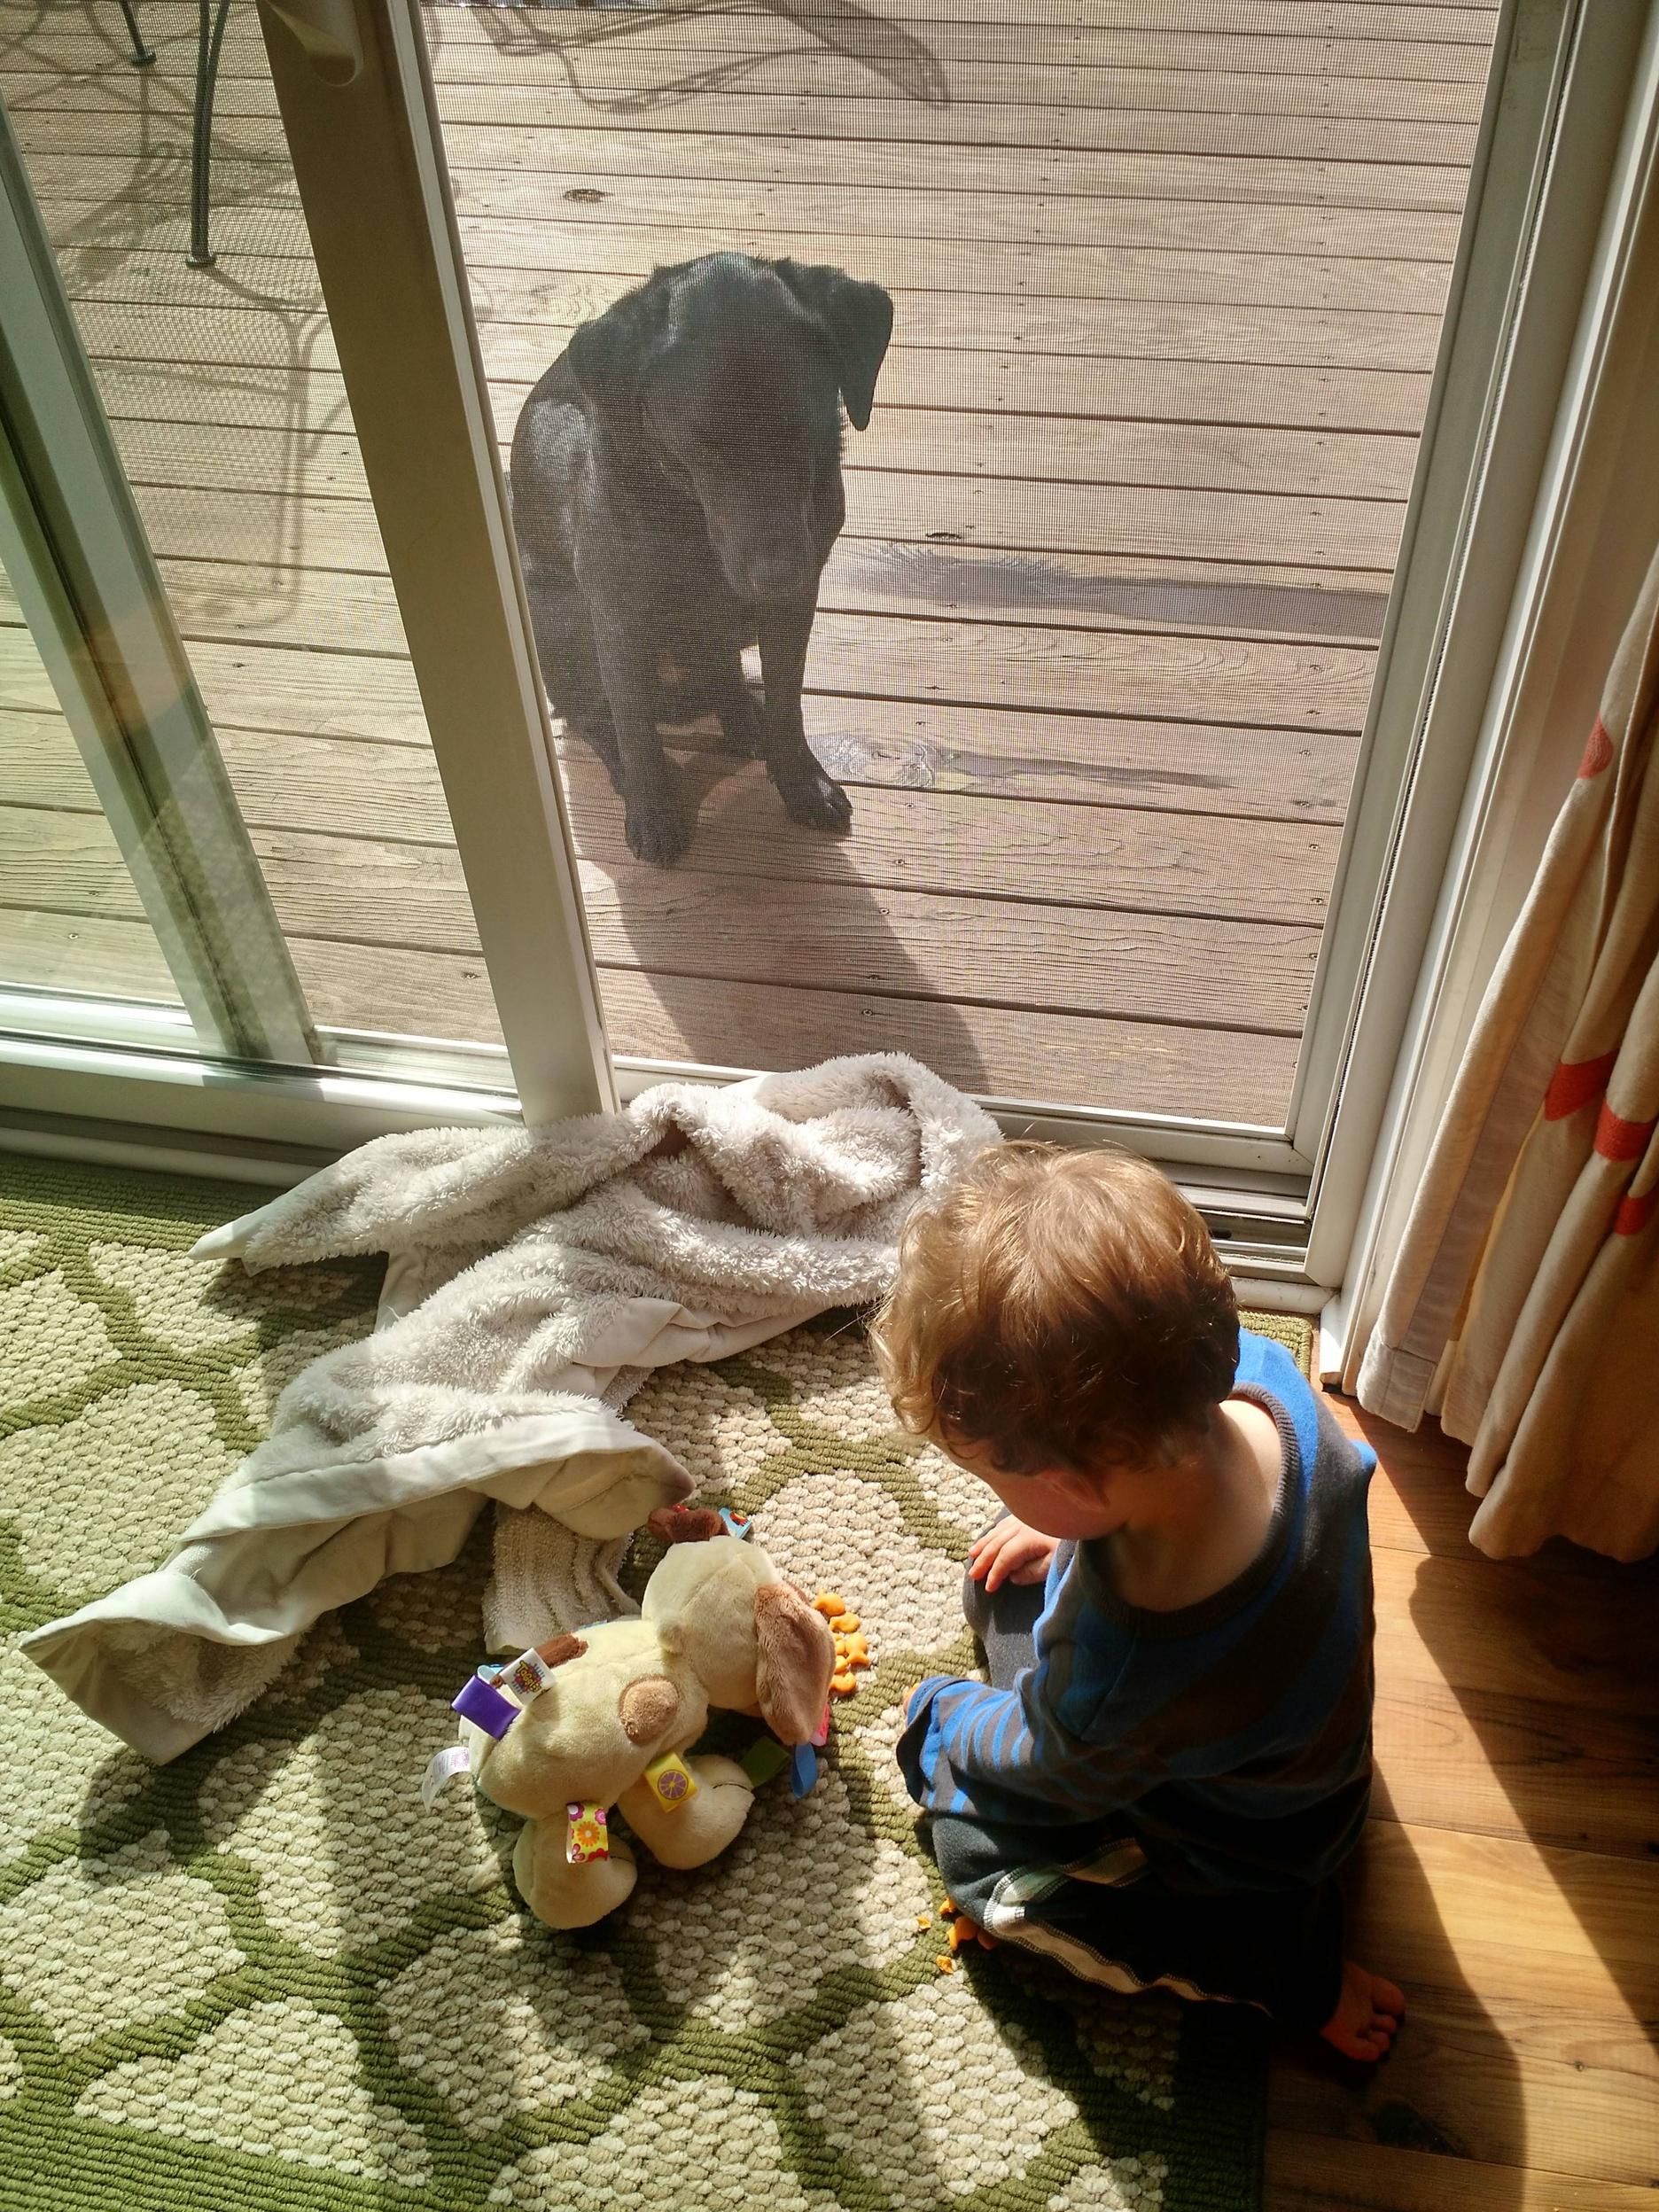 Feeding his fake dog goldfish while his real dog sits outside, pissed.